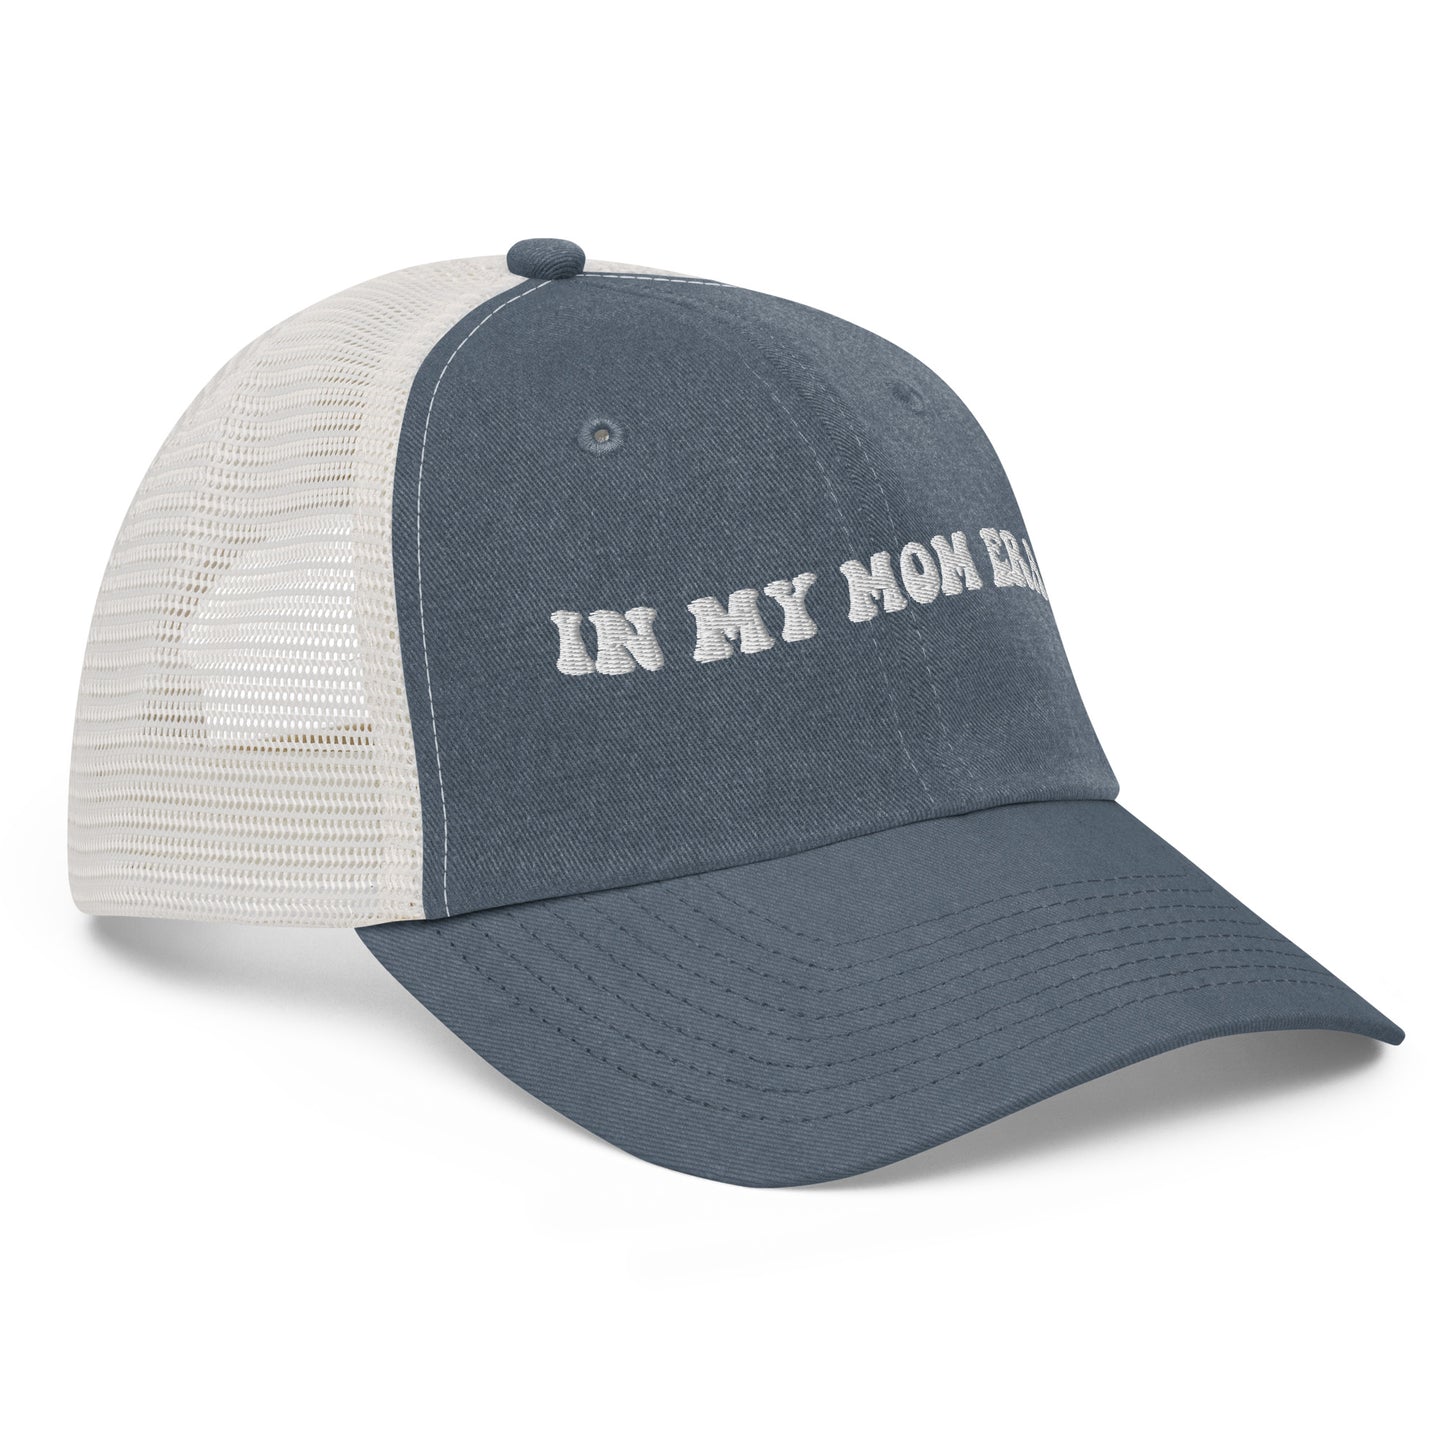 In My Mom Era Hat (5 Colors to chose from)